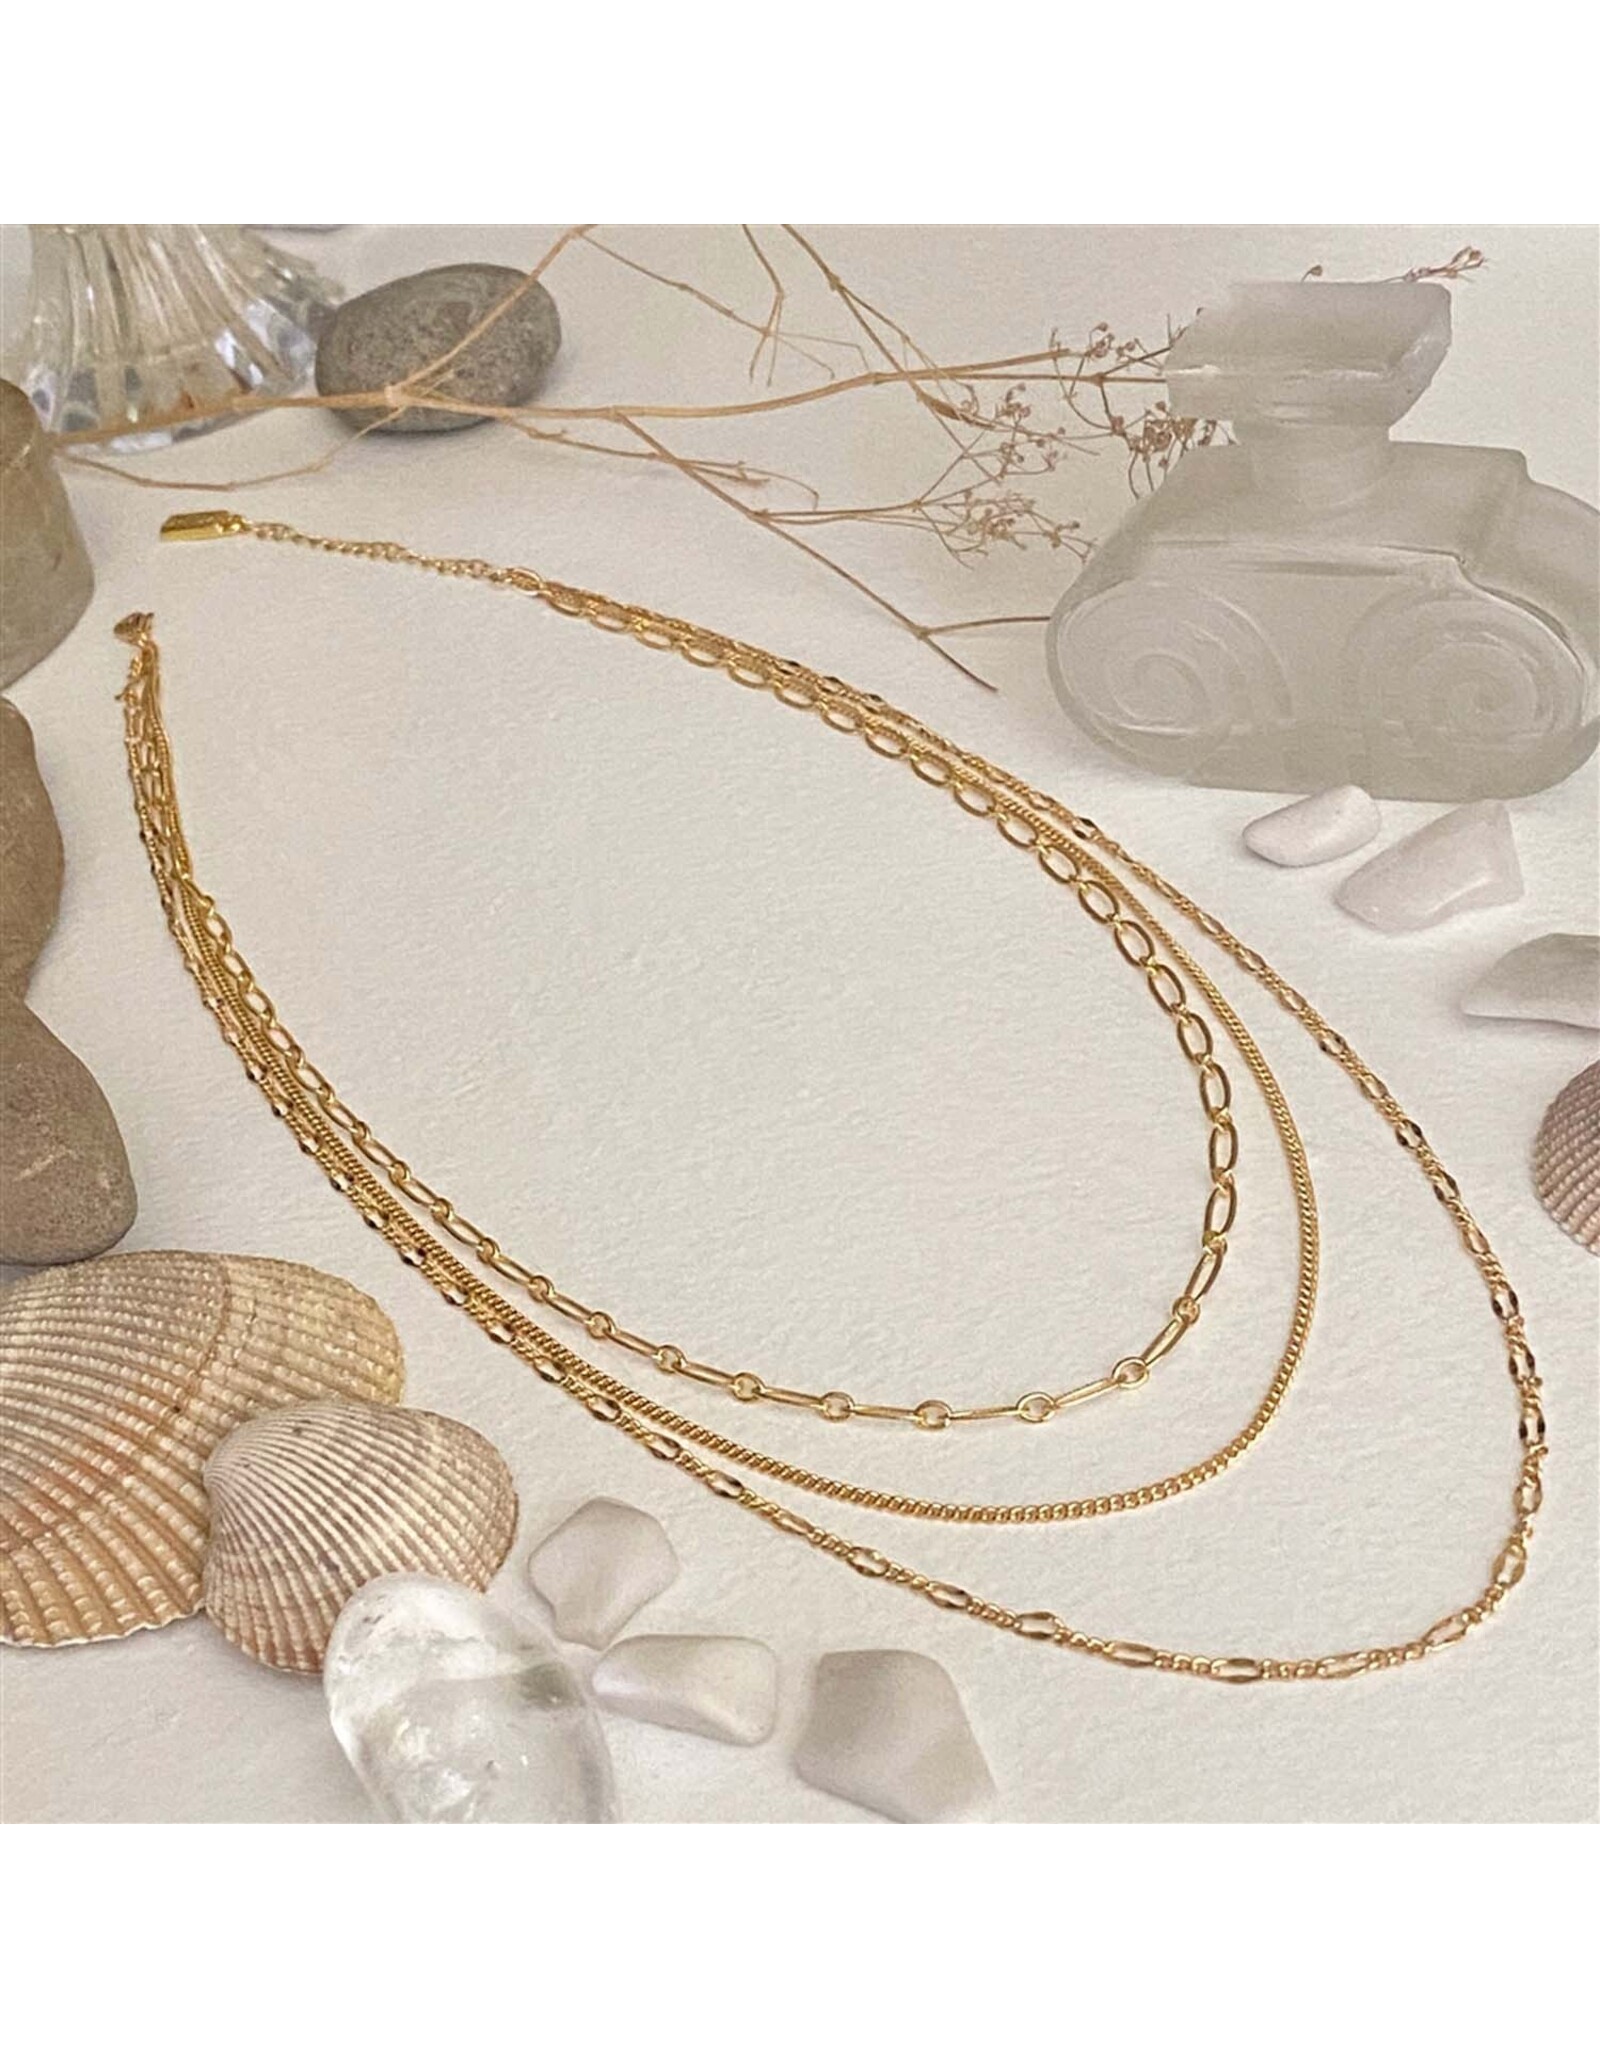 Pika & Bear Pika & Bear- Nanaimo Triple Layer Textured Chain Necklace in Gold